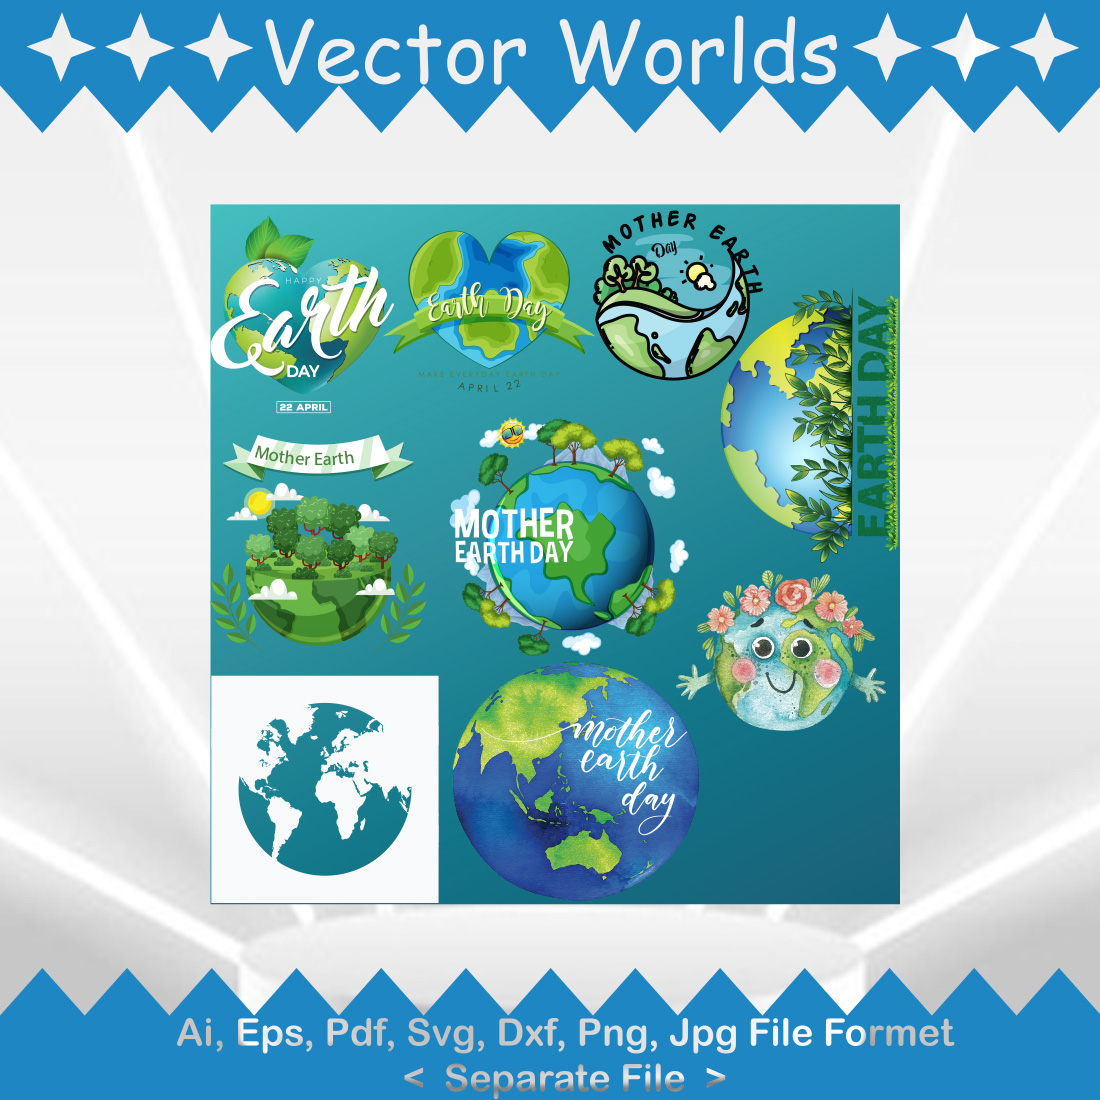 Happy Earth Day SVG Vector Design cover image.